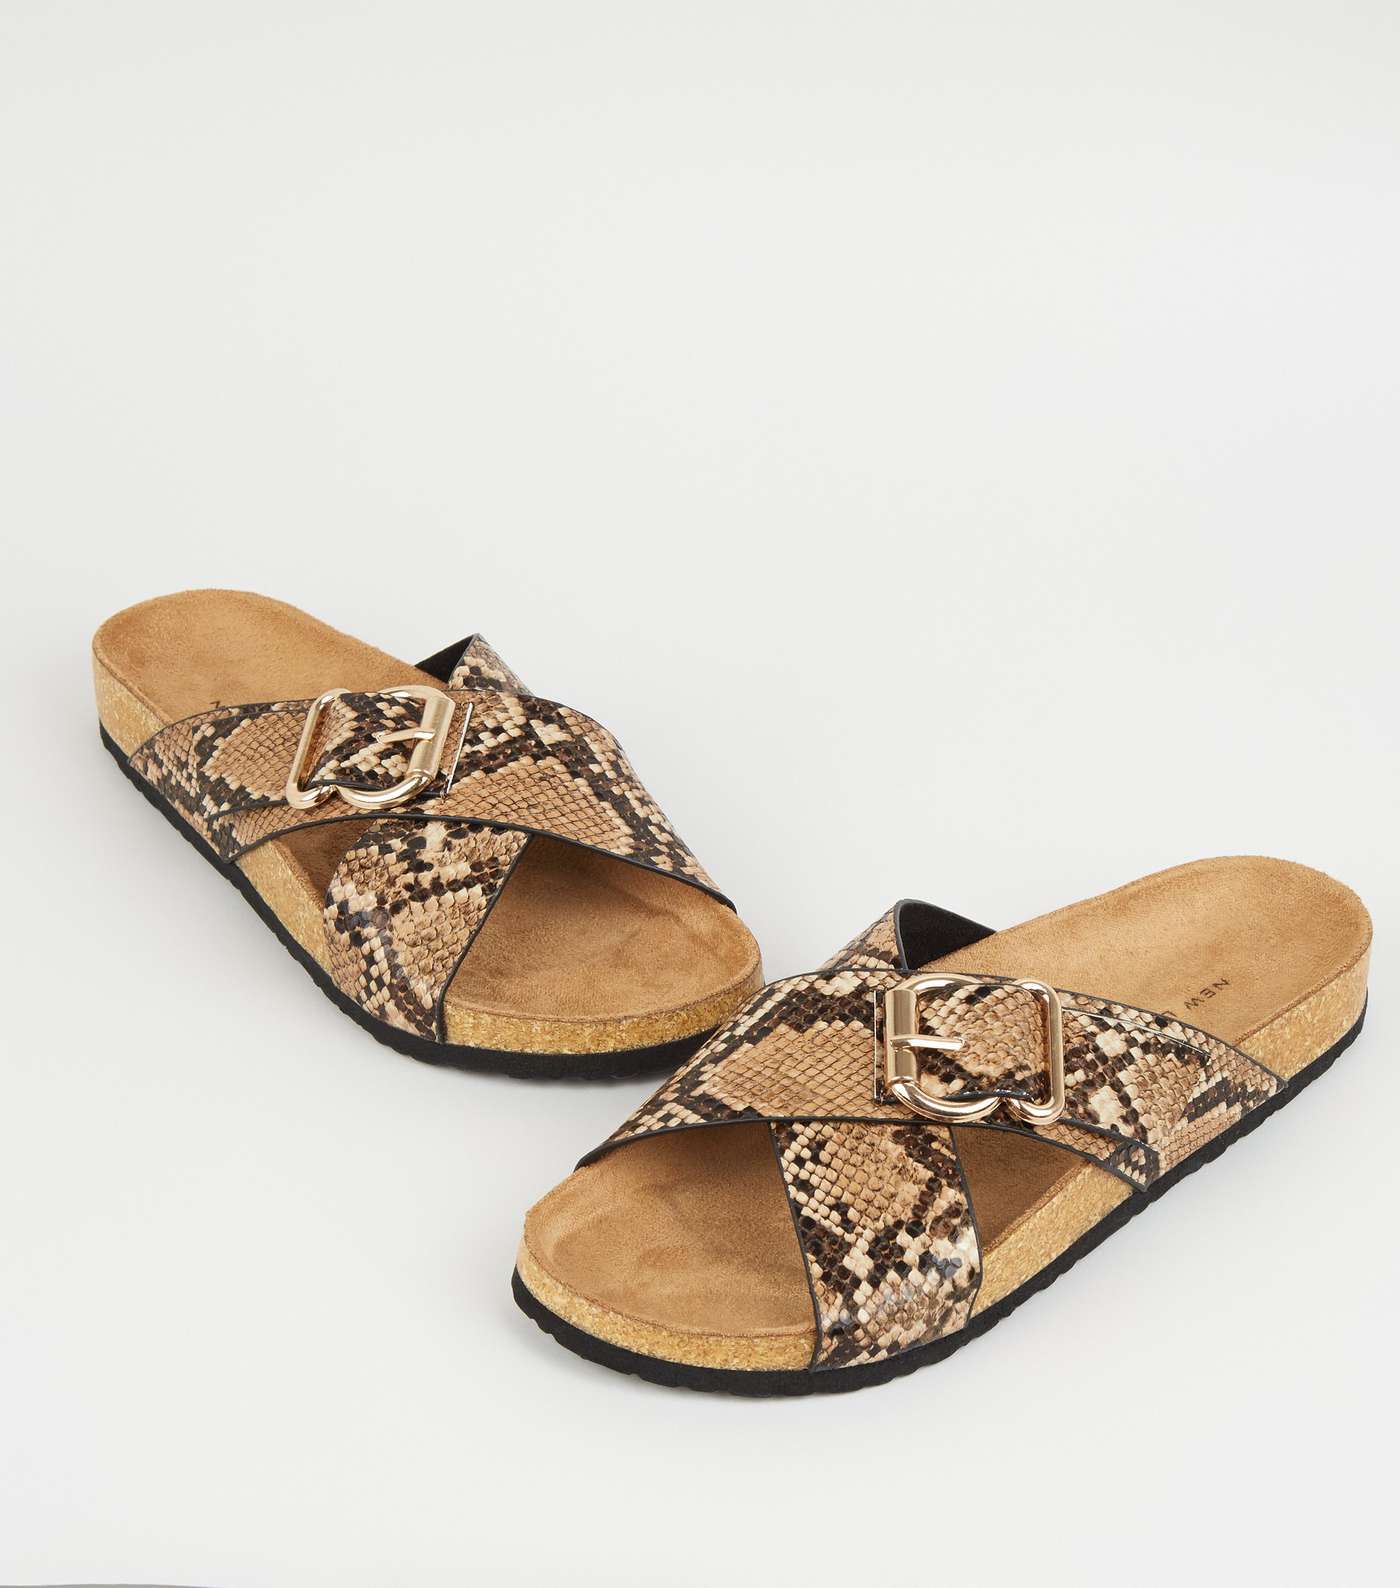 Stone Faux Snake Cross Strap Footbed Sliders Image 3